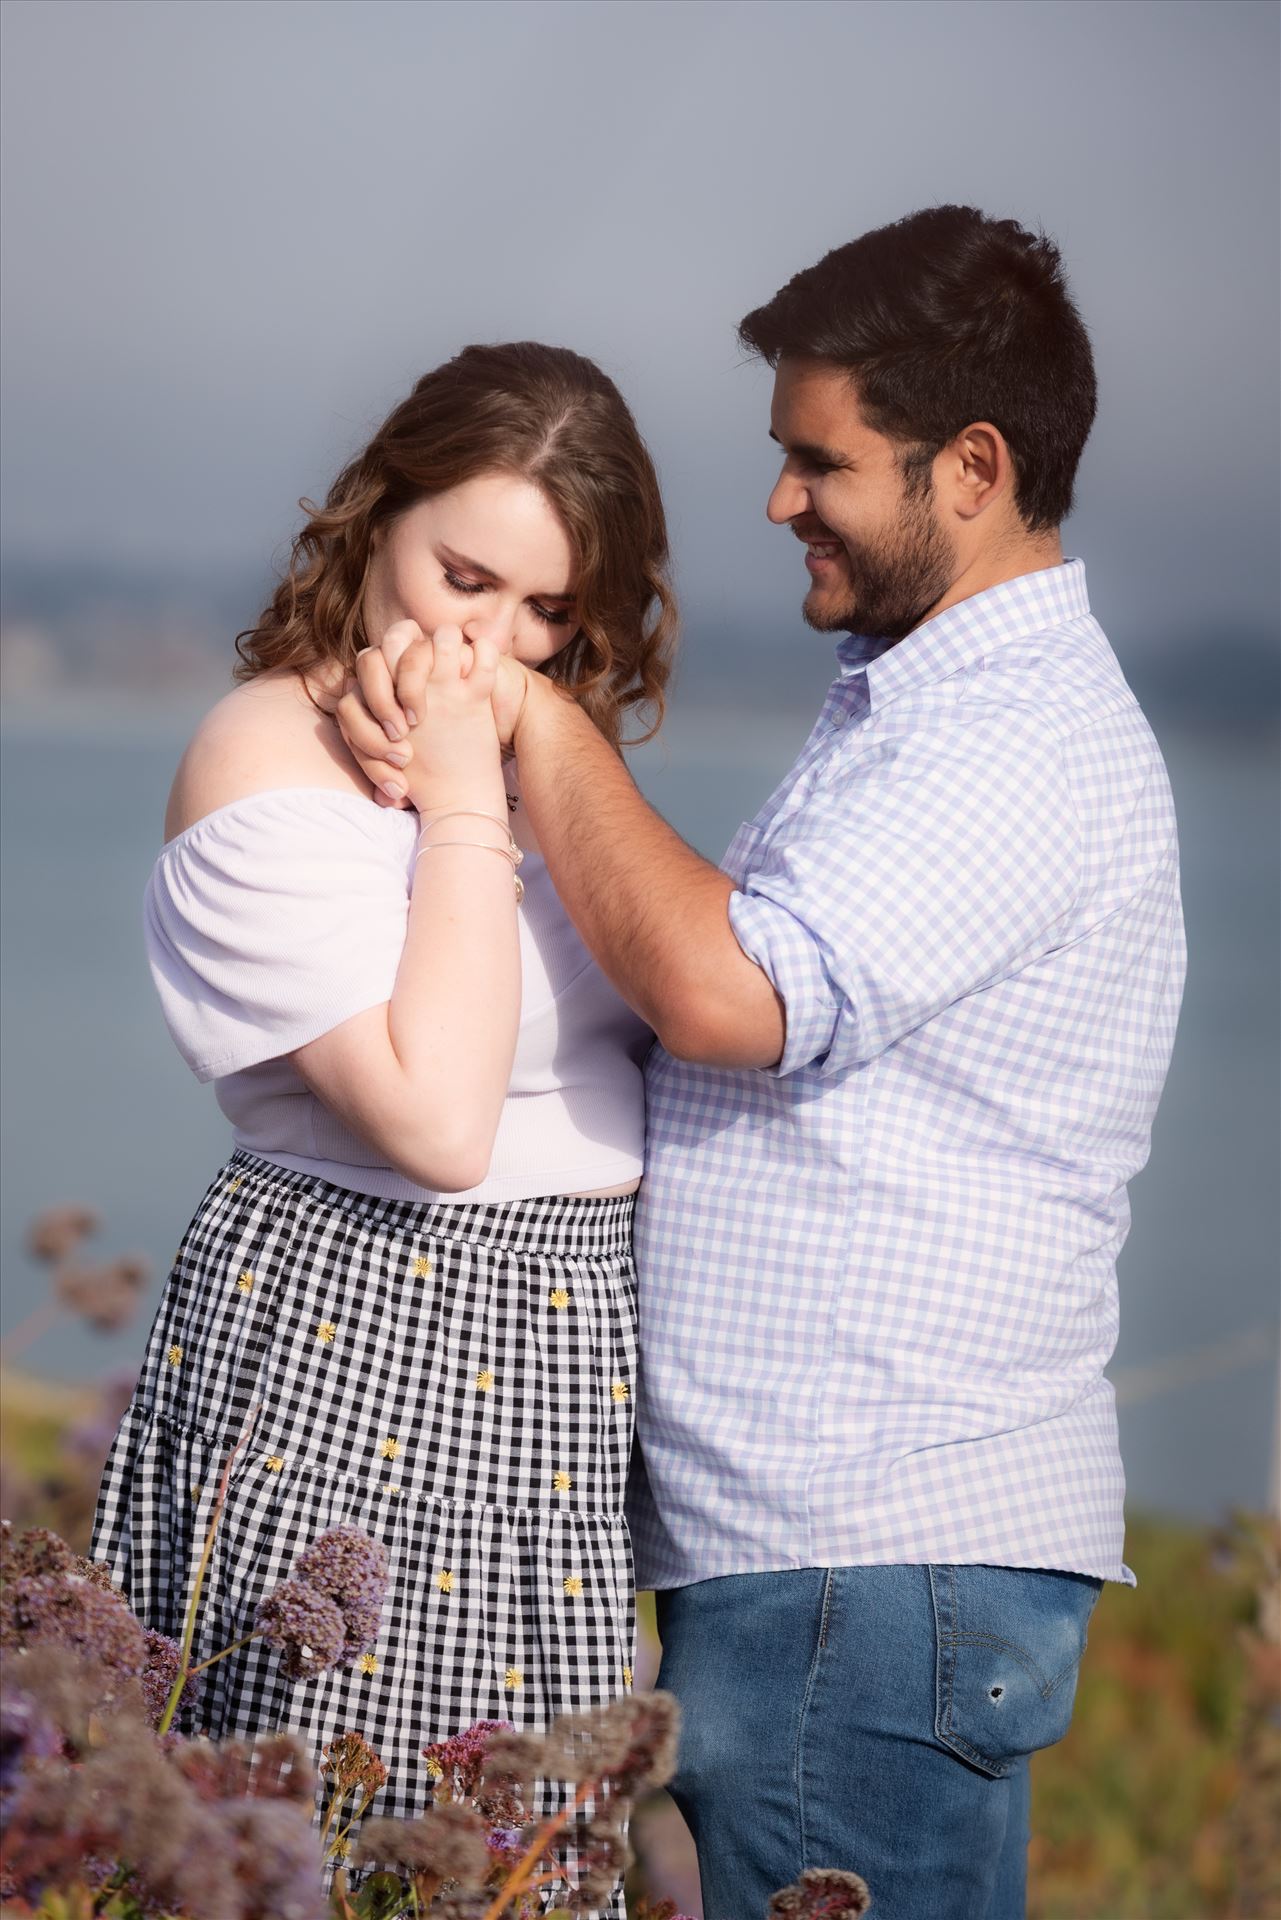 Final-75.JPG Sarah Williams of Mirror's Edge Photography, a San Luis Obispo Wedding and Engagement Photographer, captures Kara-Leigh and Deaven's amazing Engagement Photography Session at the Dinosaur Caves Park in Pismo Beach California. Girl kisses hand. by Sarah Williams